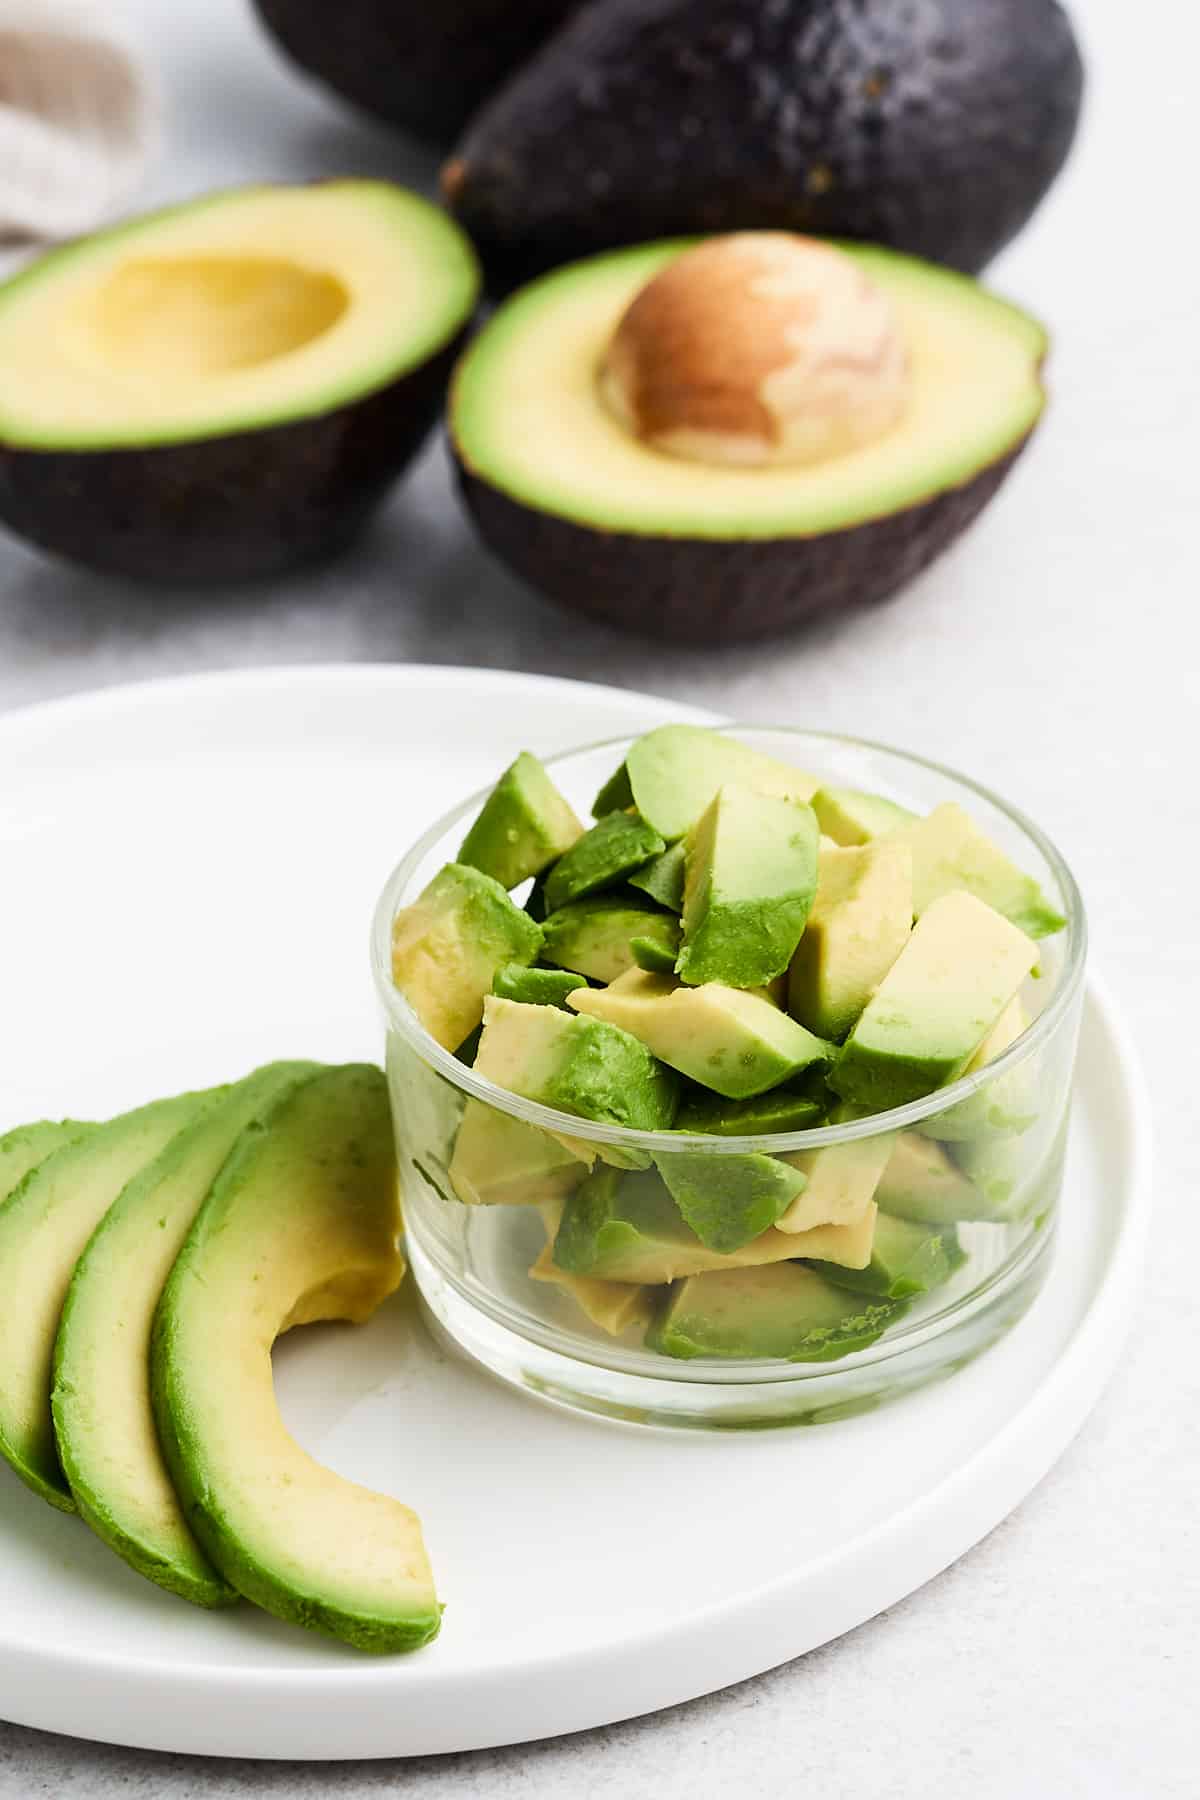 Cubed and sliced avocado.